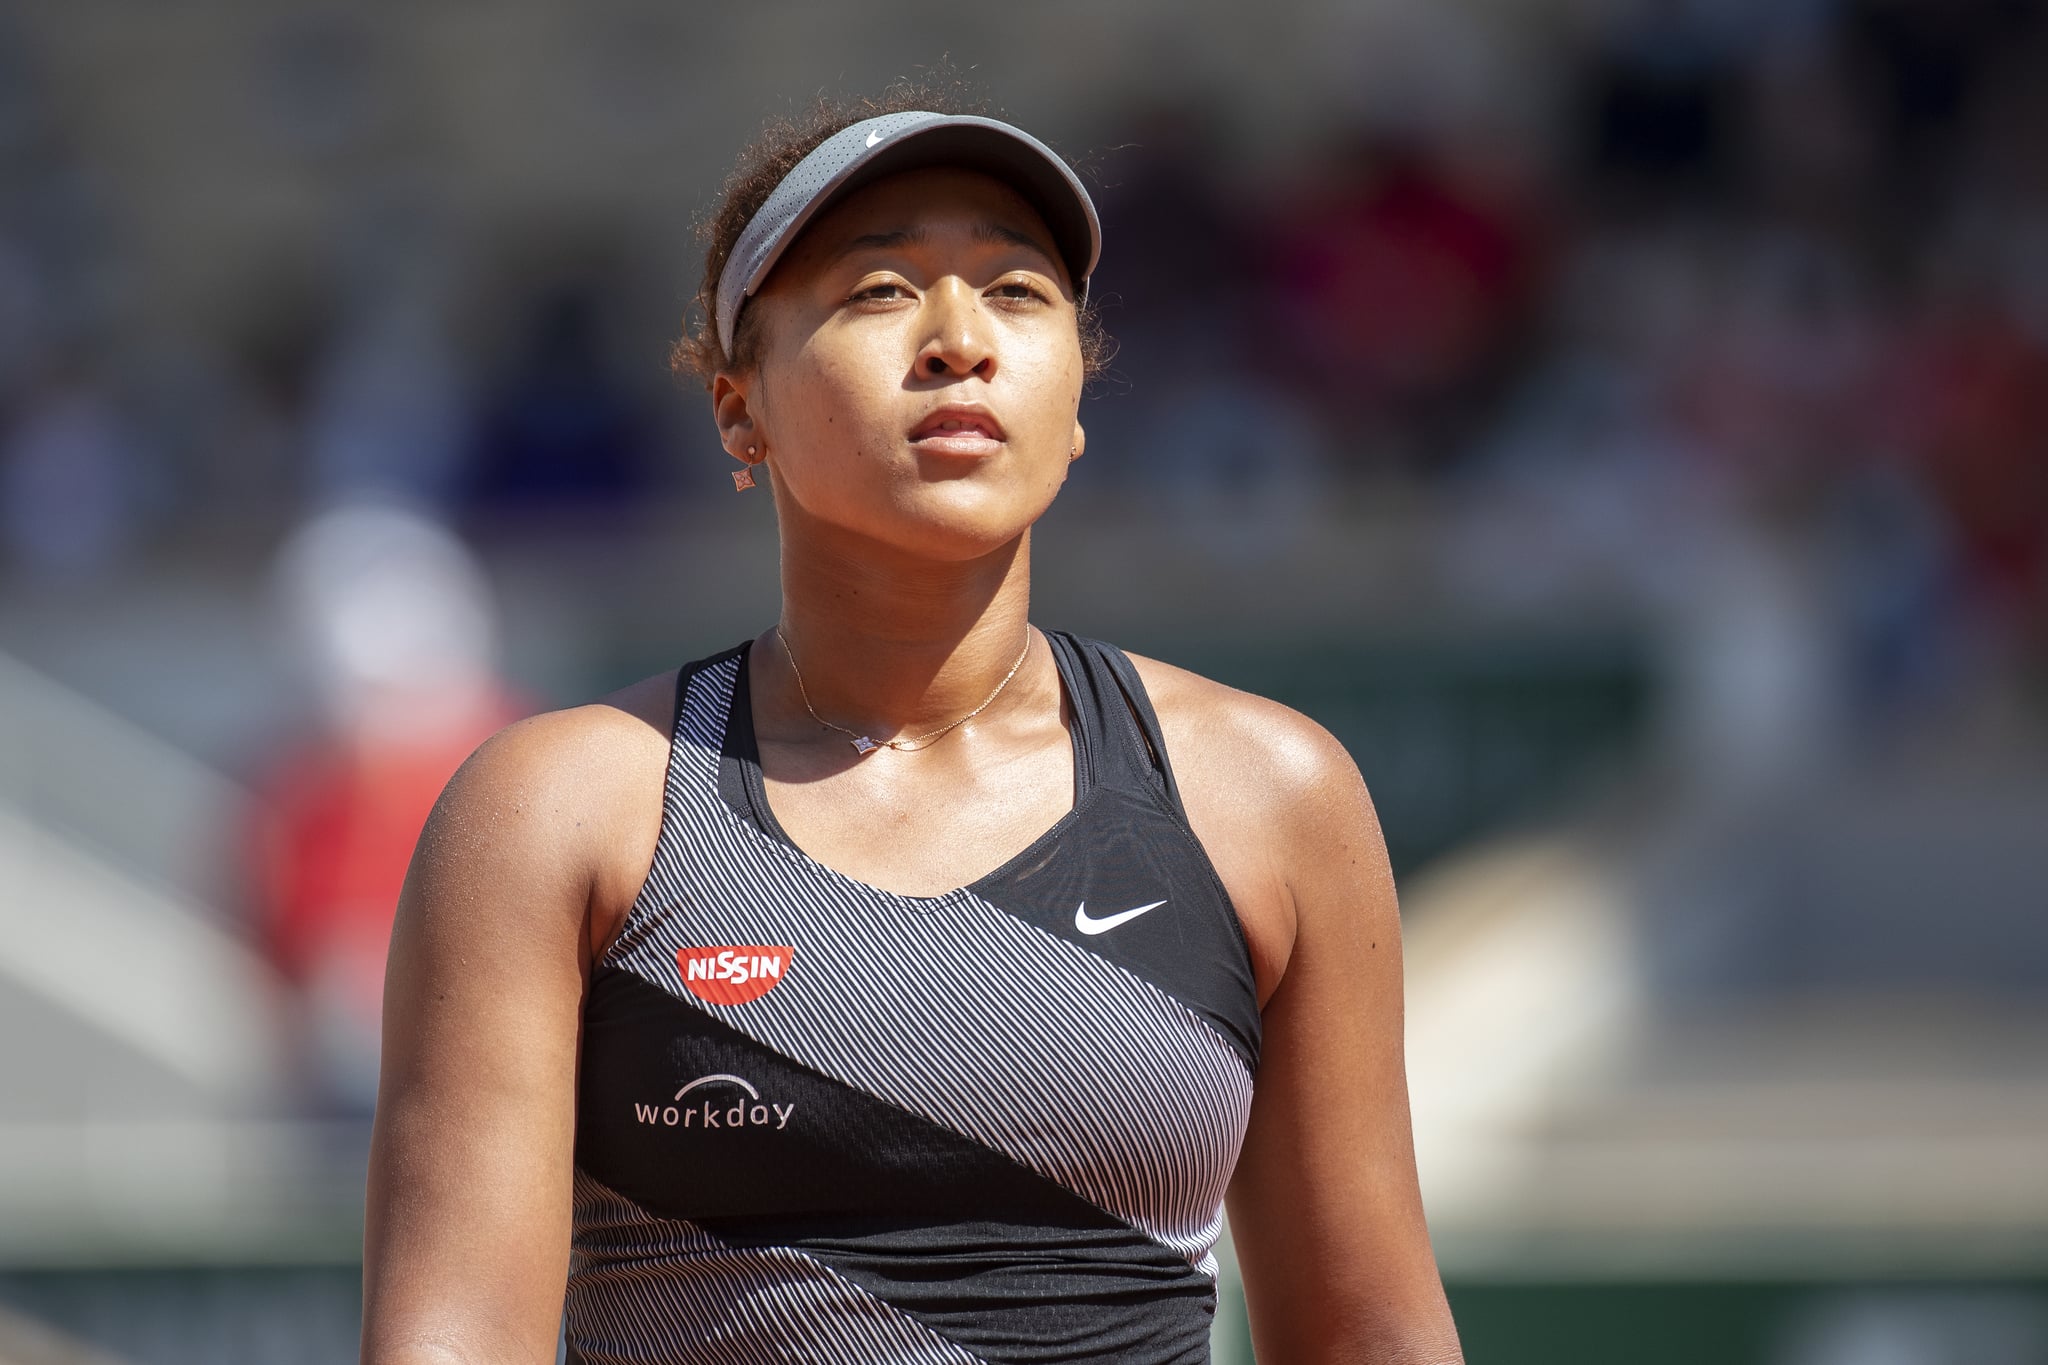 PARIS, FRANCE May 30. Naomi Osaka of Japan during her match against Patricia Maria Tig of Romania in the first round of the Women's Singles competition on Court Philippe-Chatrier at the 2021 French Open Tennis Tournament at Roland Garros on May 30th 2021 in Paris, France. (Photo by Tim Clayton/Corbis via Getty Images)